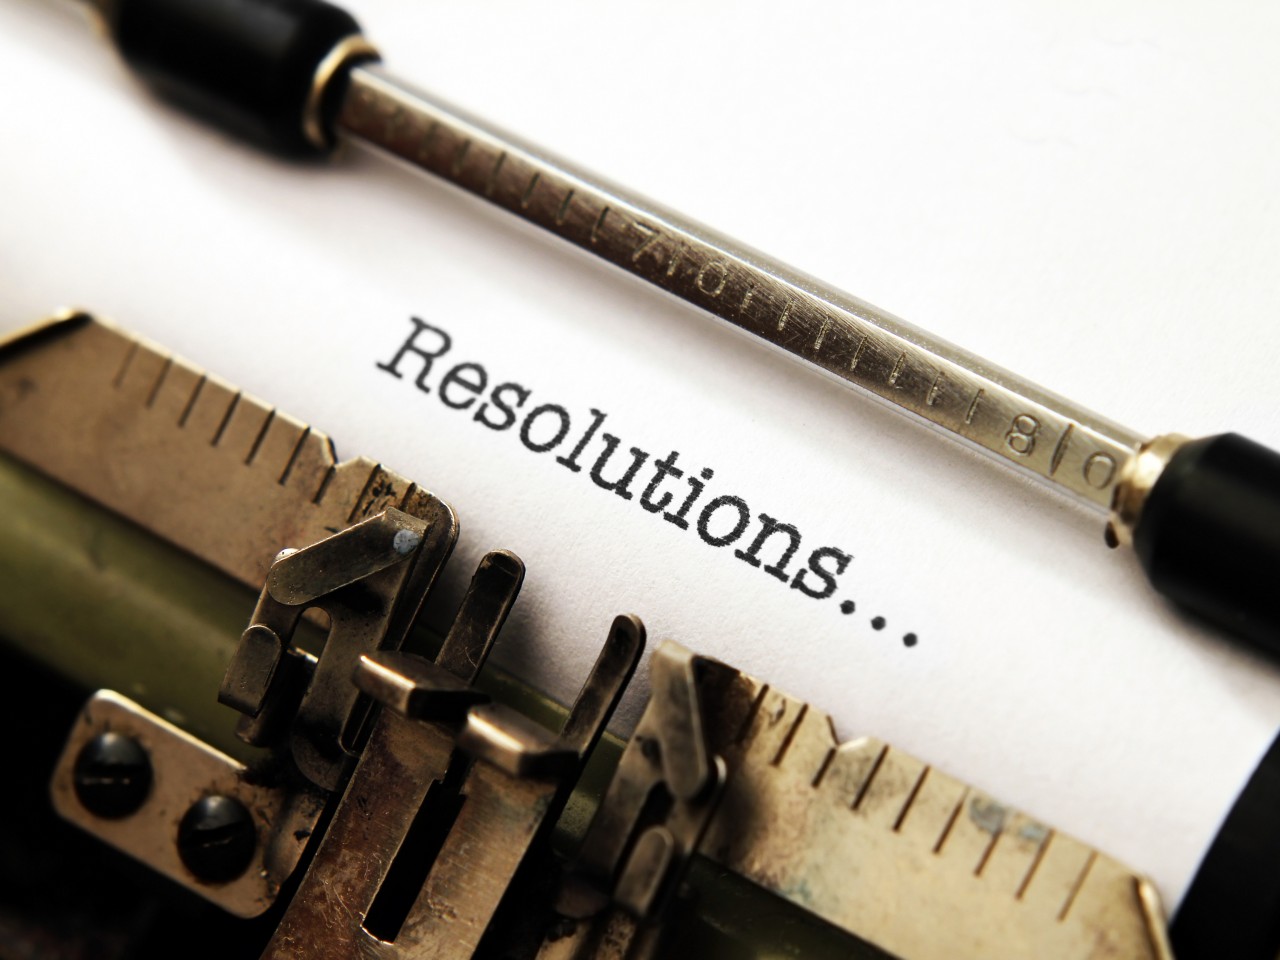 Rite of passage parenting: Your New Year’s resolutions